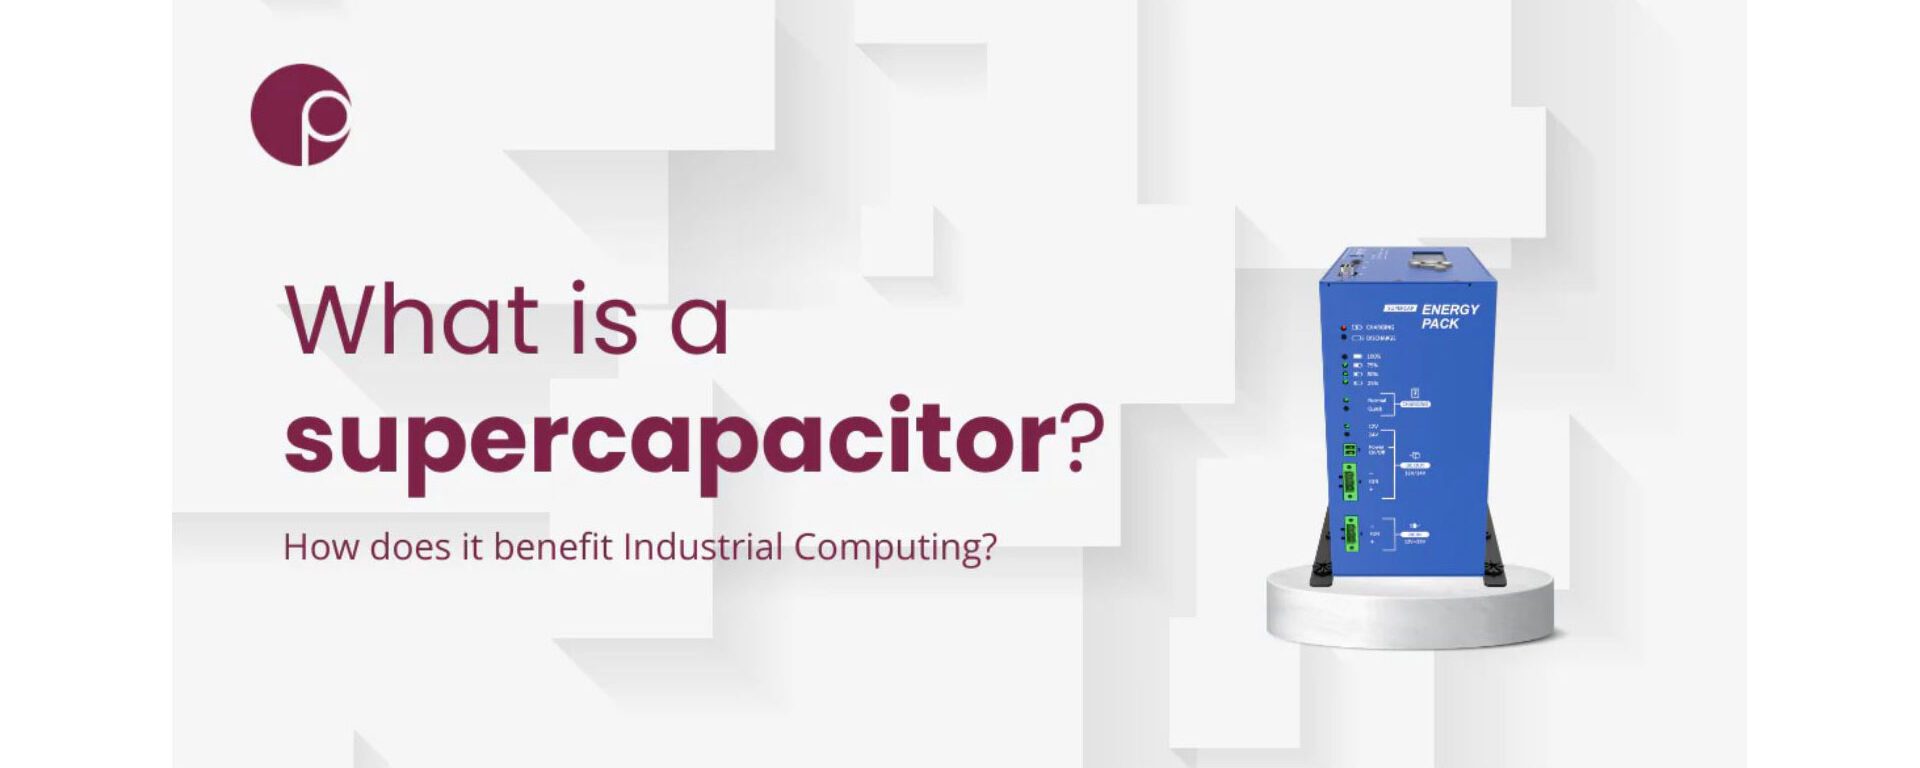 Recommended Reading: What is a Supercapacitor?